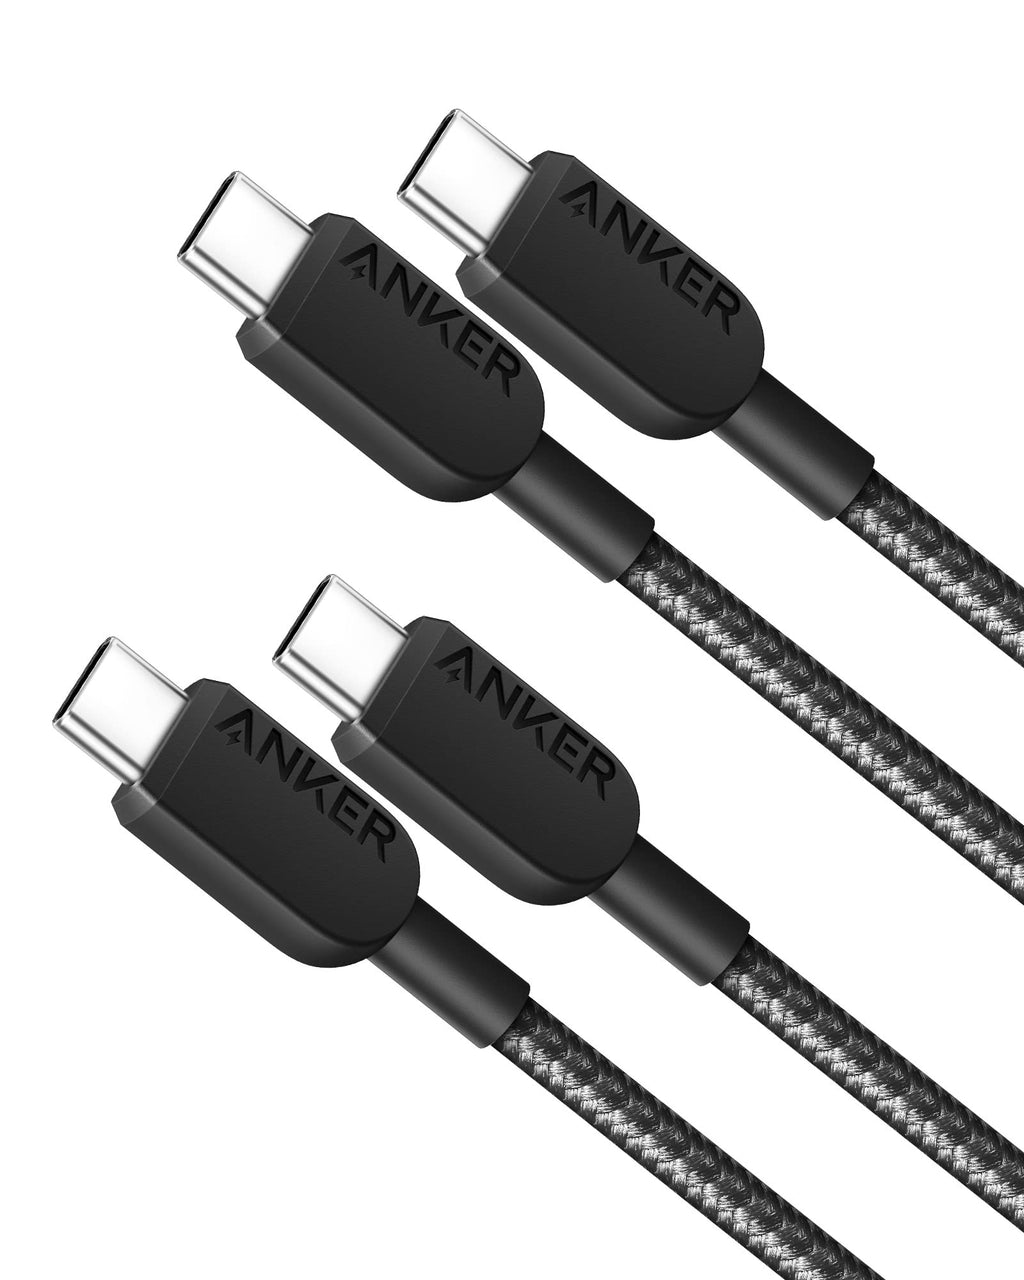 Anker 310 USB C to USB C Cable (3ft, 2 Pack),Fast Charging Cable for iPhone 15, Samsung Galaxy S23, iPad Pro 2021, iPad Mini 6, iPad Air 4, MacBook Pro 2020, Switch (USB 2.0) 3ft Black